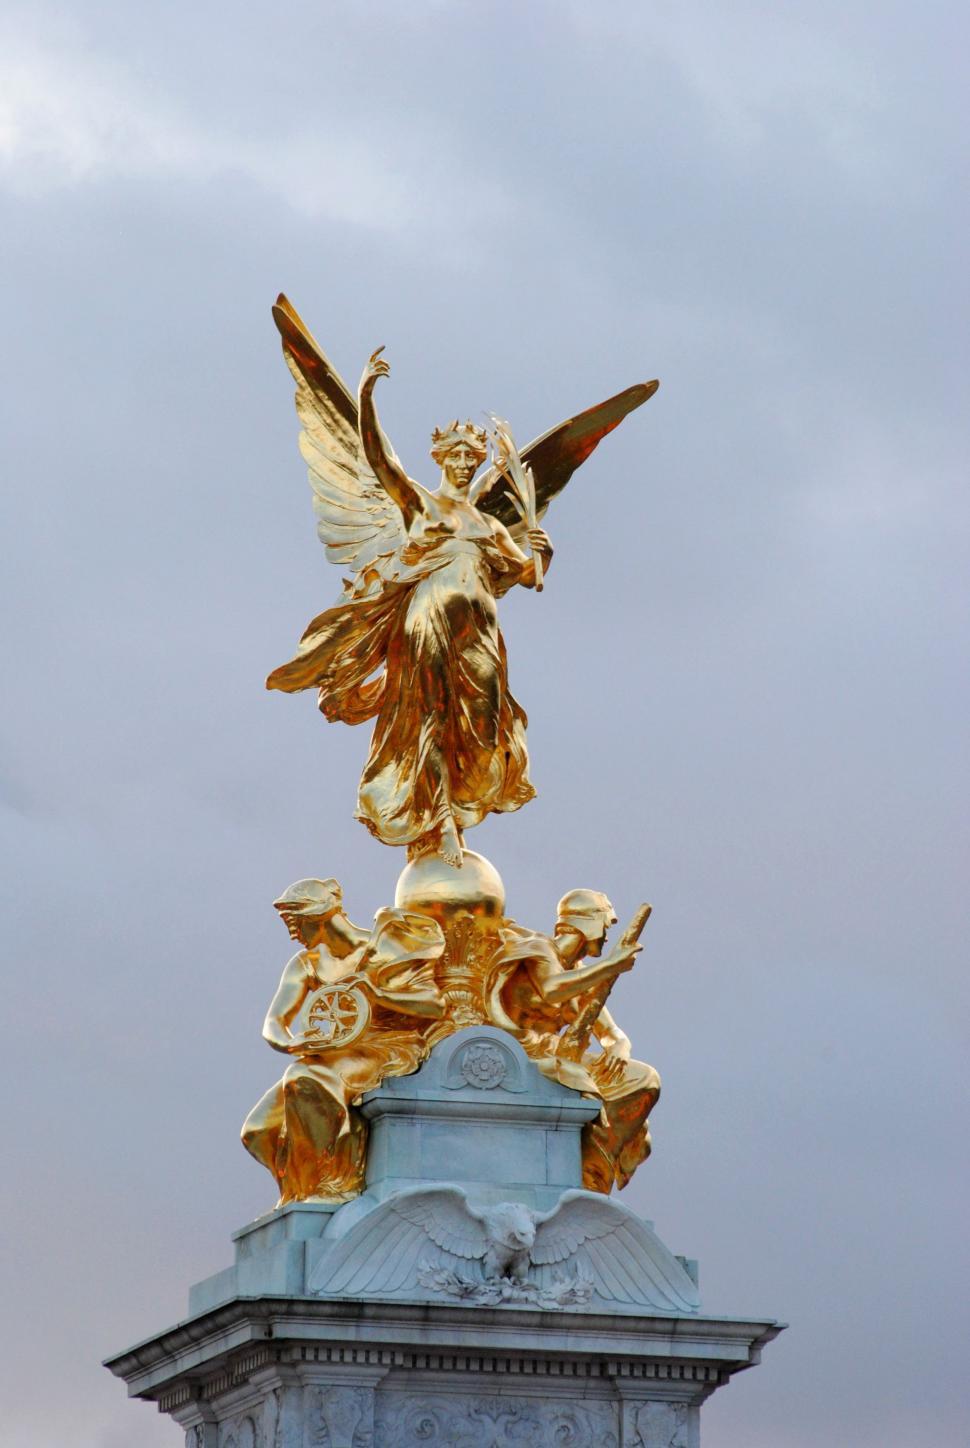 Free Image of Golden Statue - London  